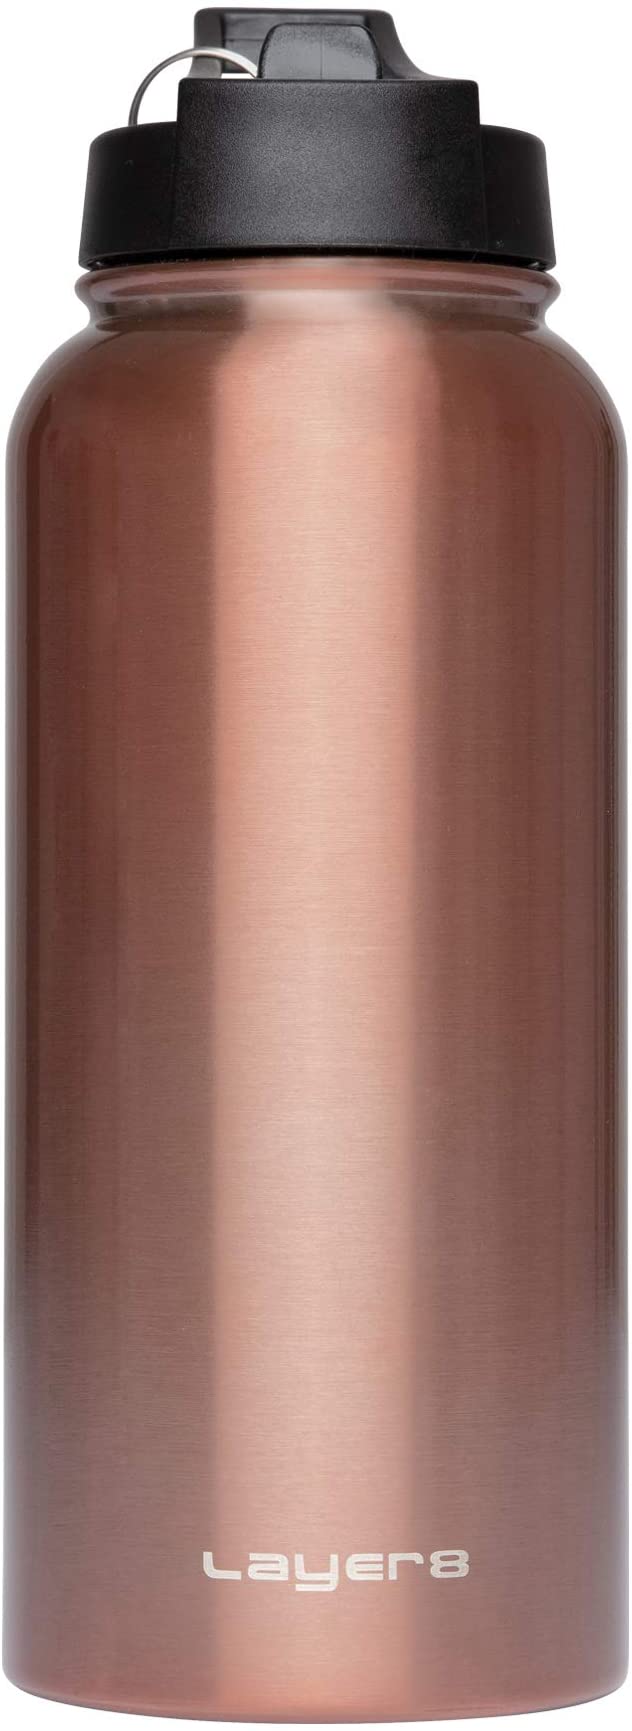 Layer 8 Stainless Steel Portable Water Bottle with Straw & Wide Mouth Lids Double Wall Vaccum Inuslated Leakproof 22 and 32 Oz